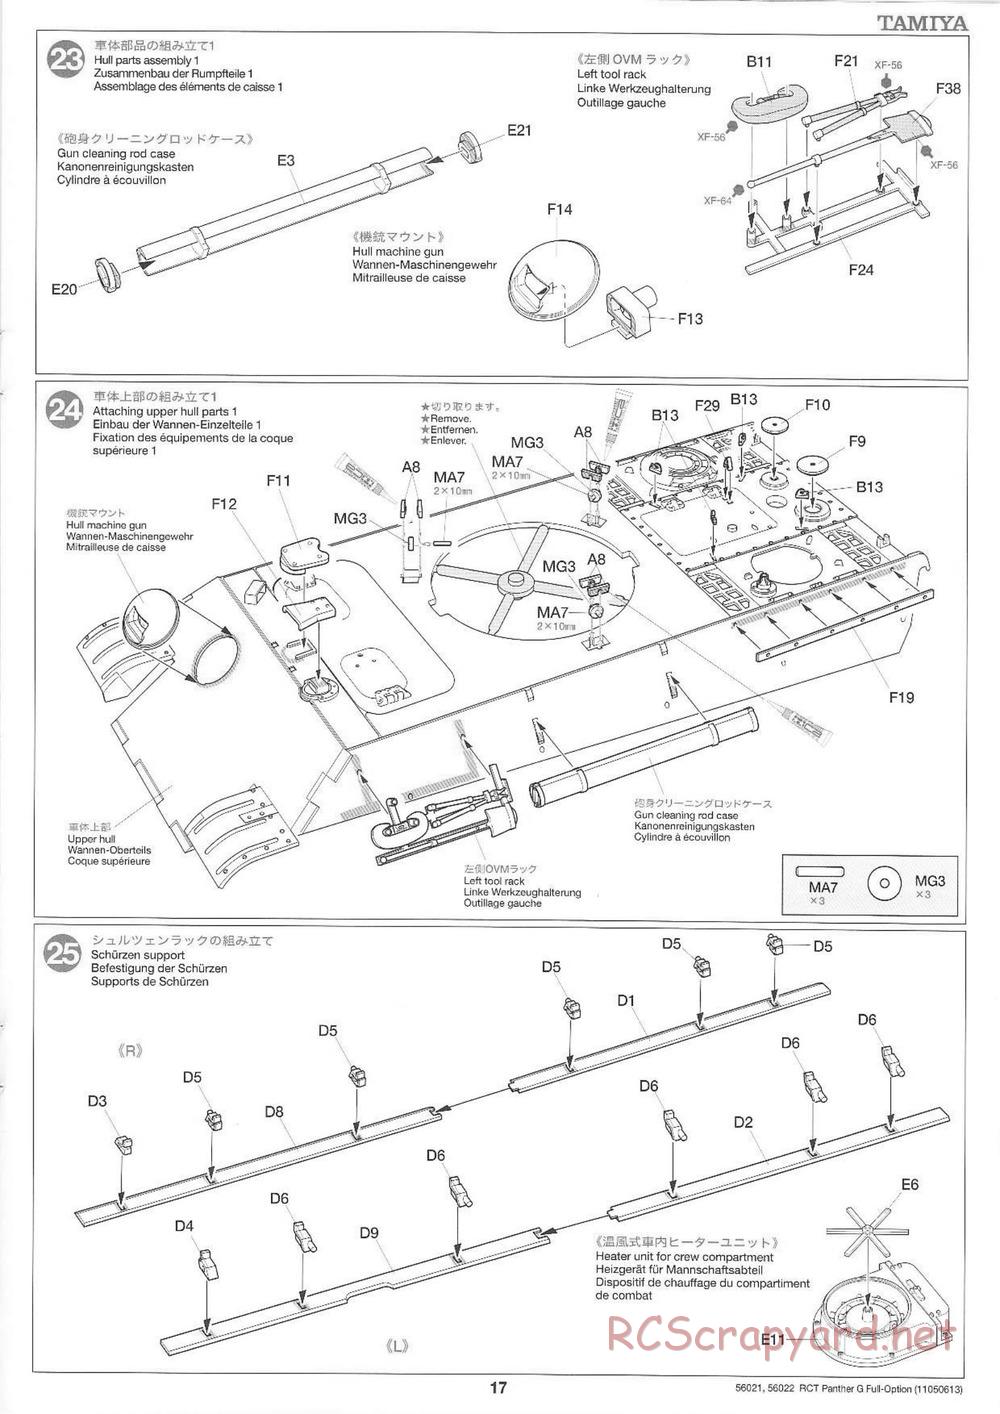 Tamiya - Panther Type G - 1/16 Scale Chassis - Manual - Page 17